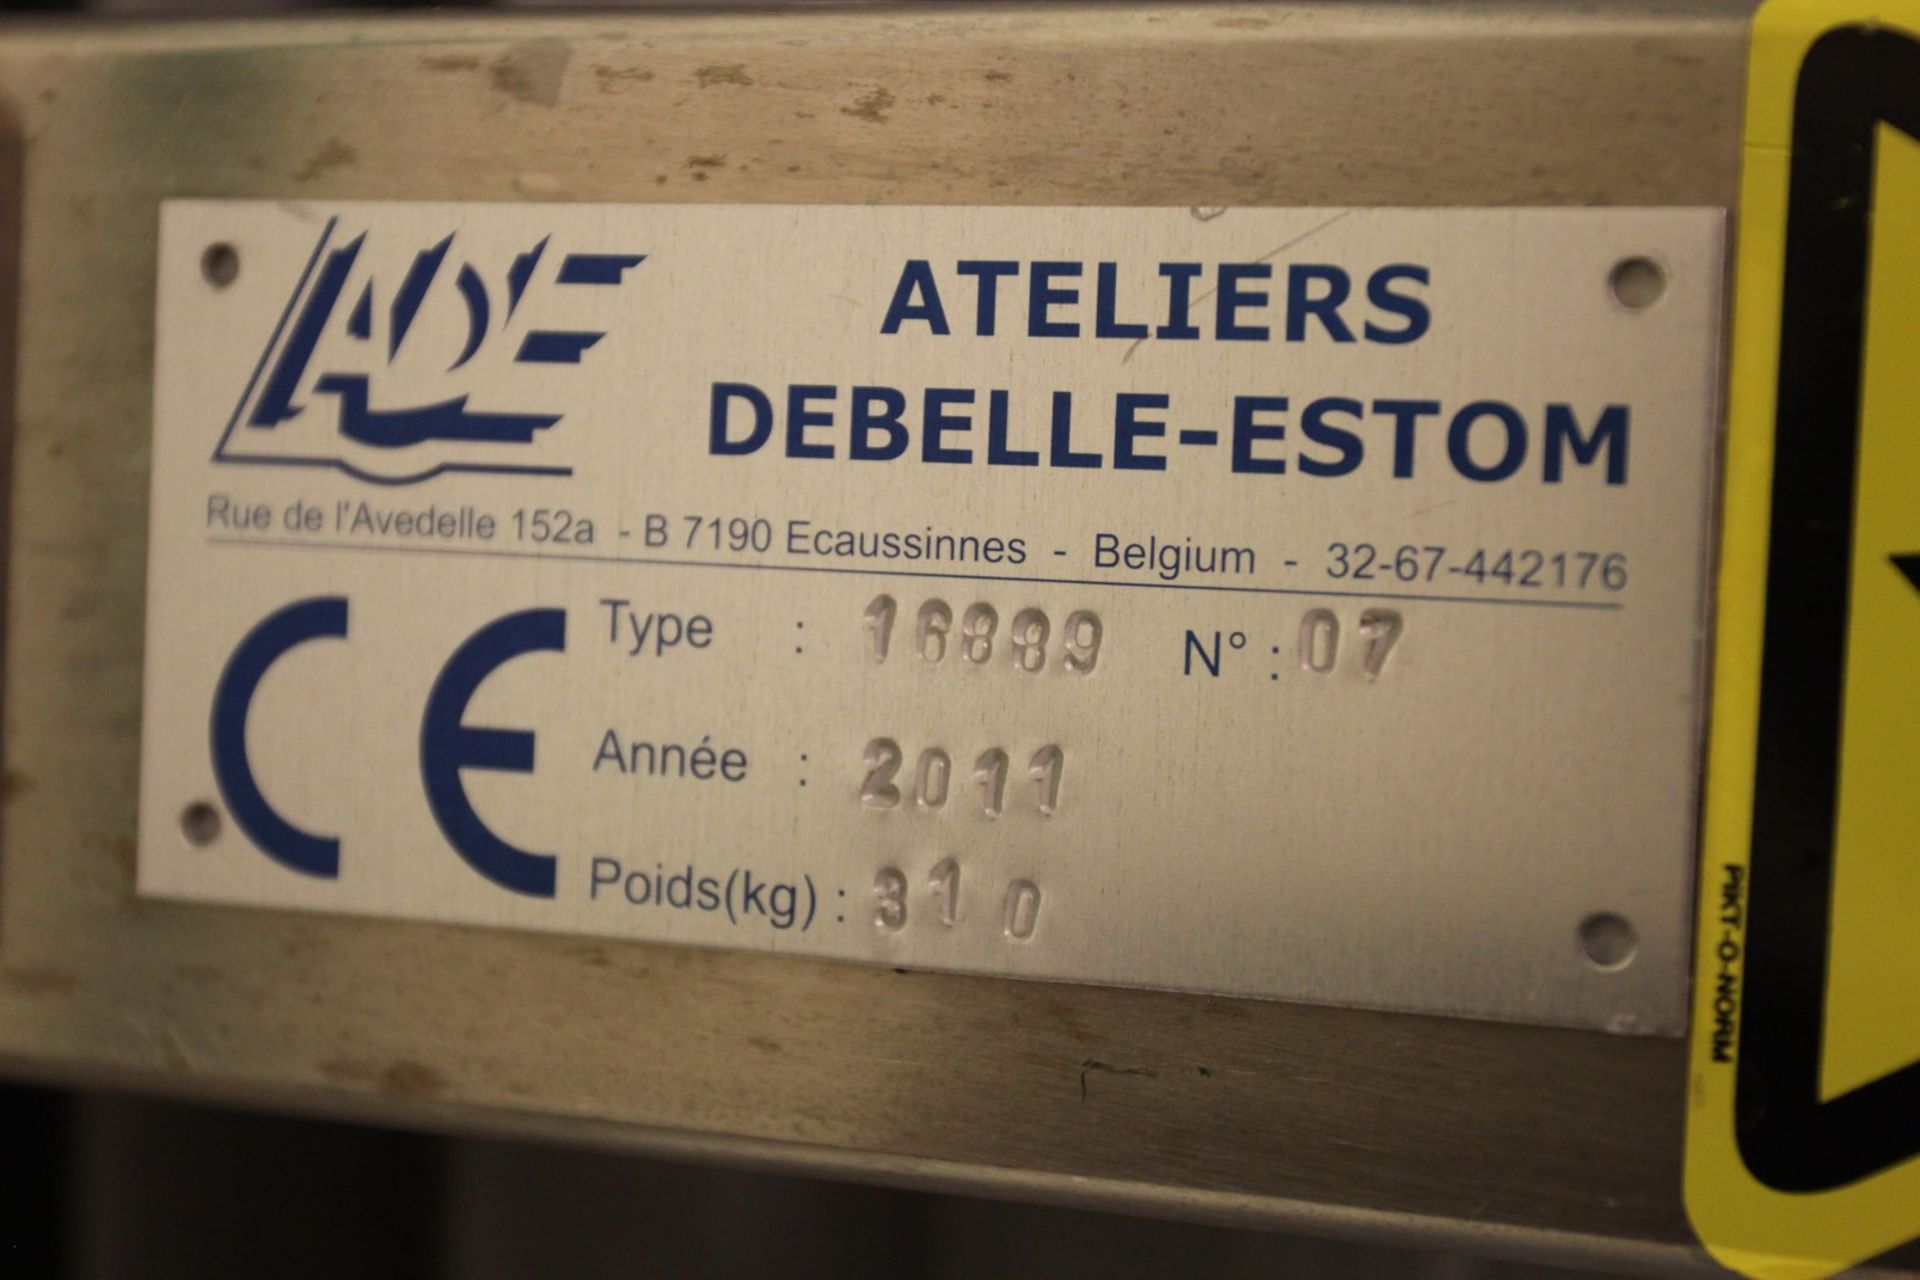 2011 ADE Ateliers Debelle-Estom 16889 Mobile Electric Lift Table, s/n 07 - Image 4 of 4